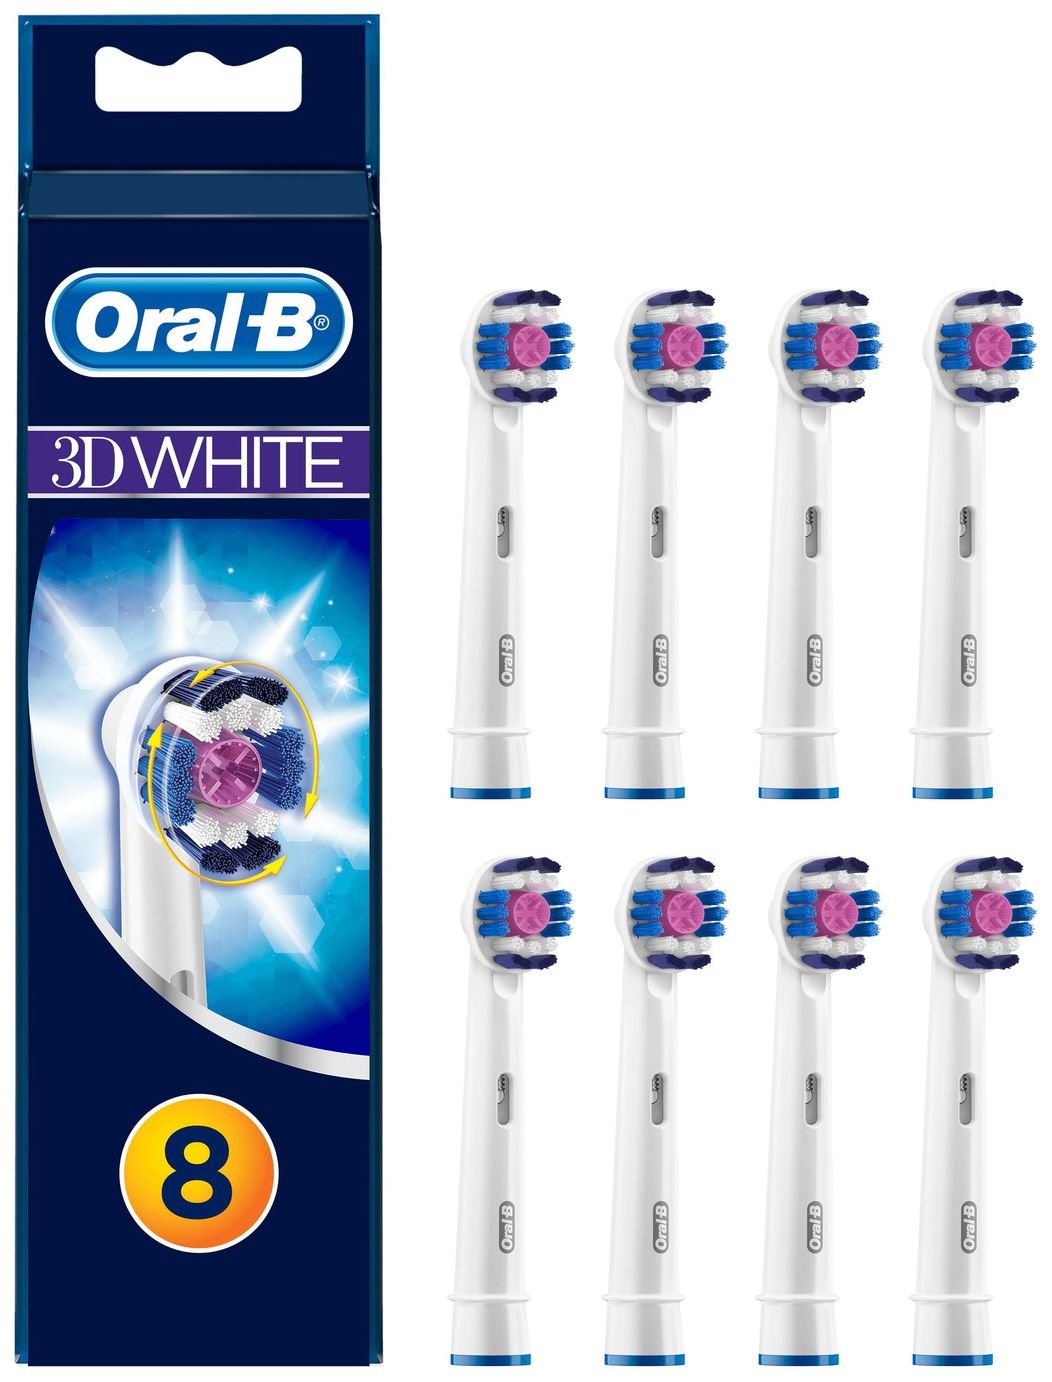 Oral-B 3DWhite Electric Toothbrush Heads Review